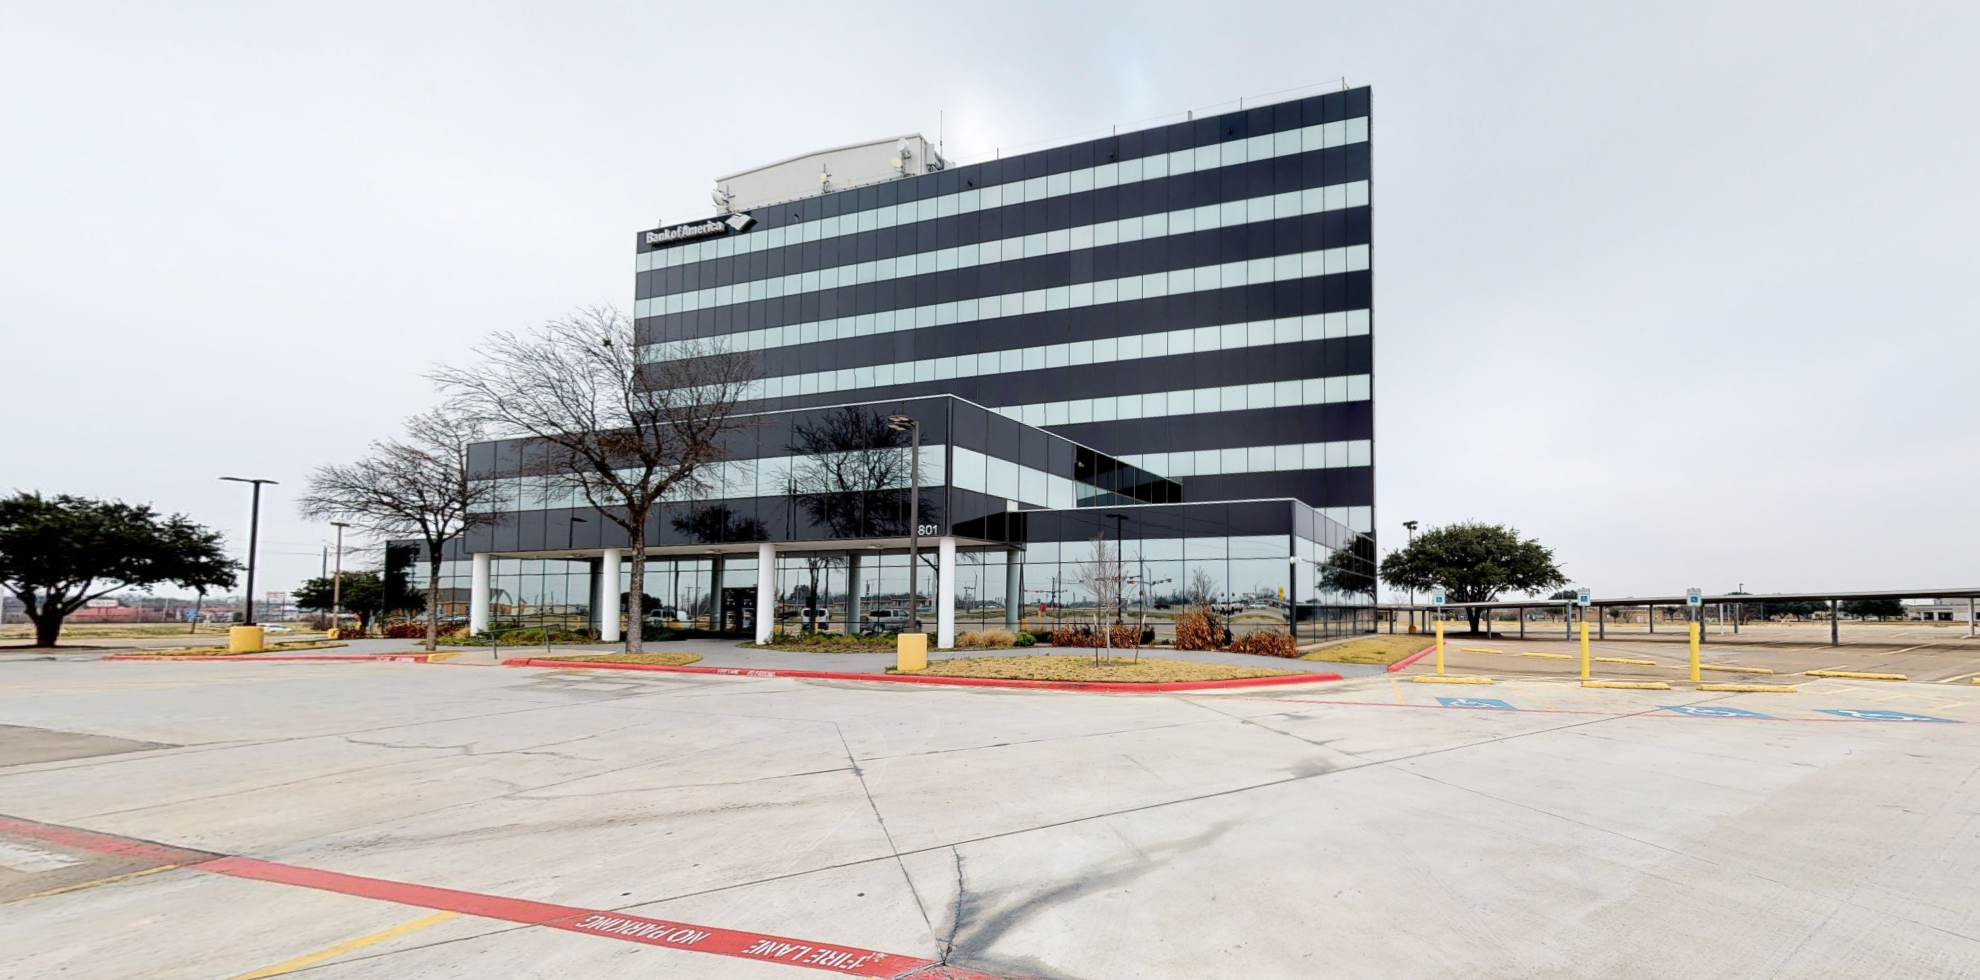 Bank of America financial center with walk-up ATM | 801 S State Highway 161 Ste 100, Grand Prairie, TX 75051